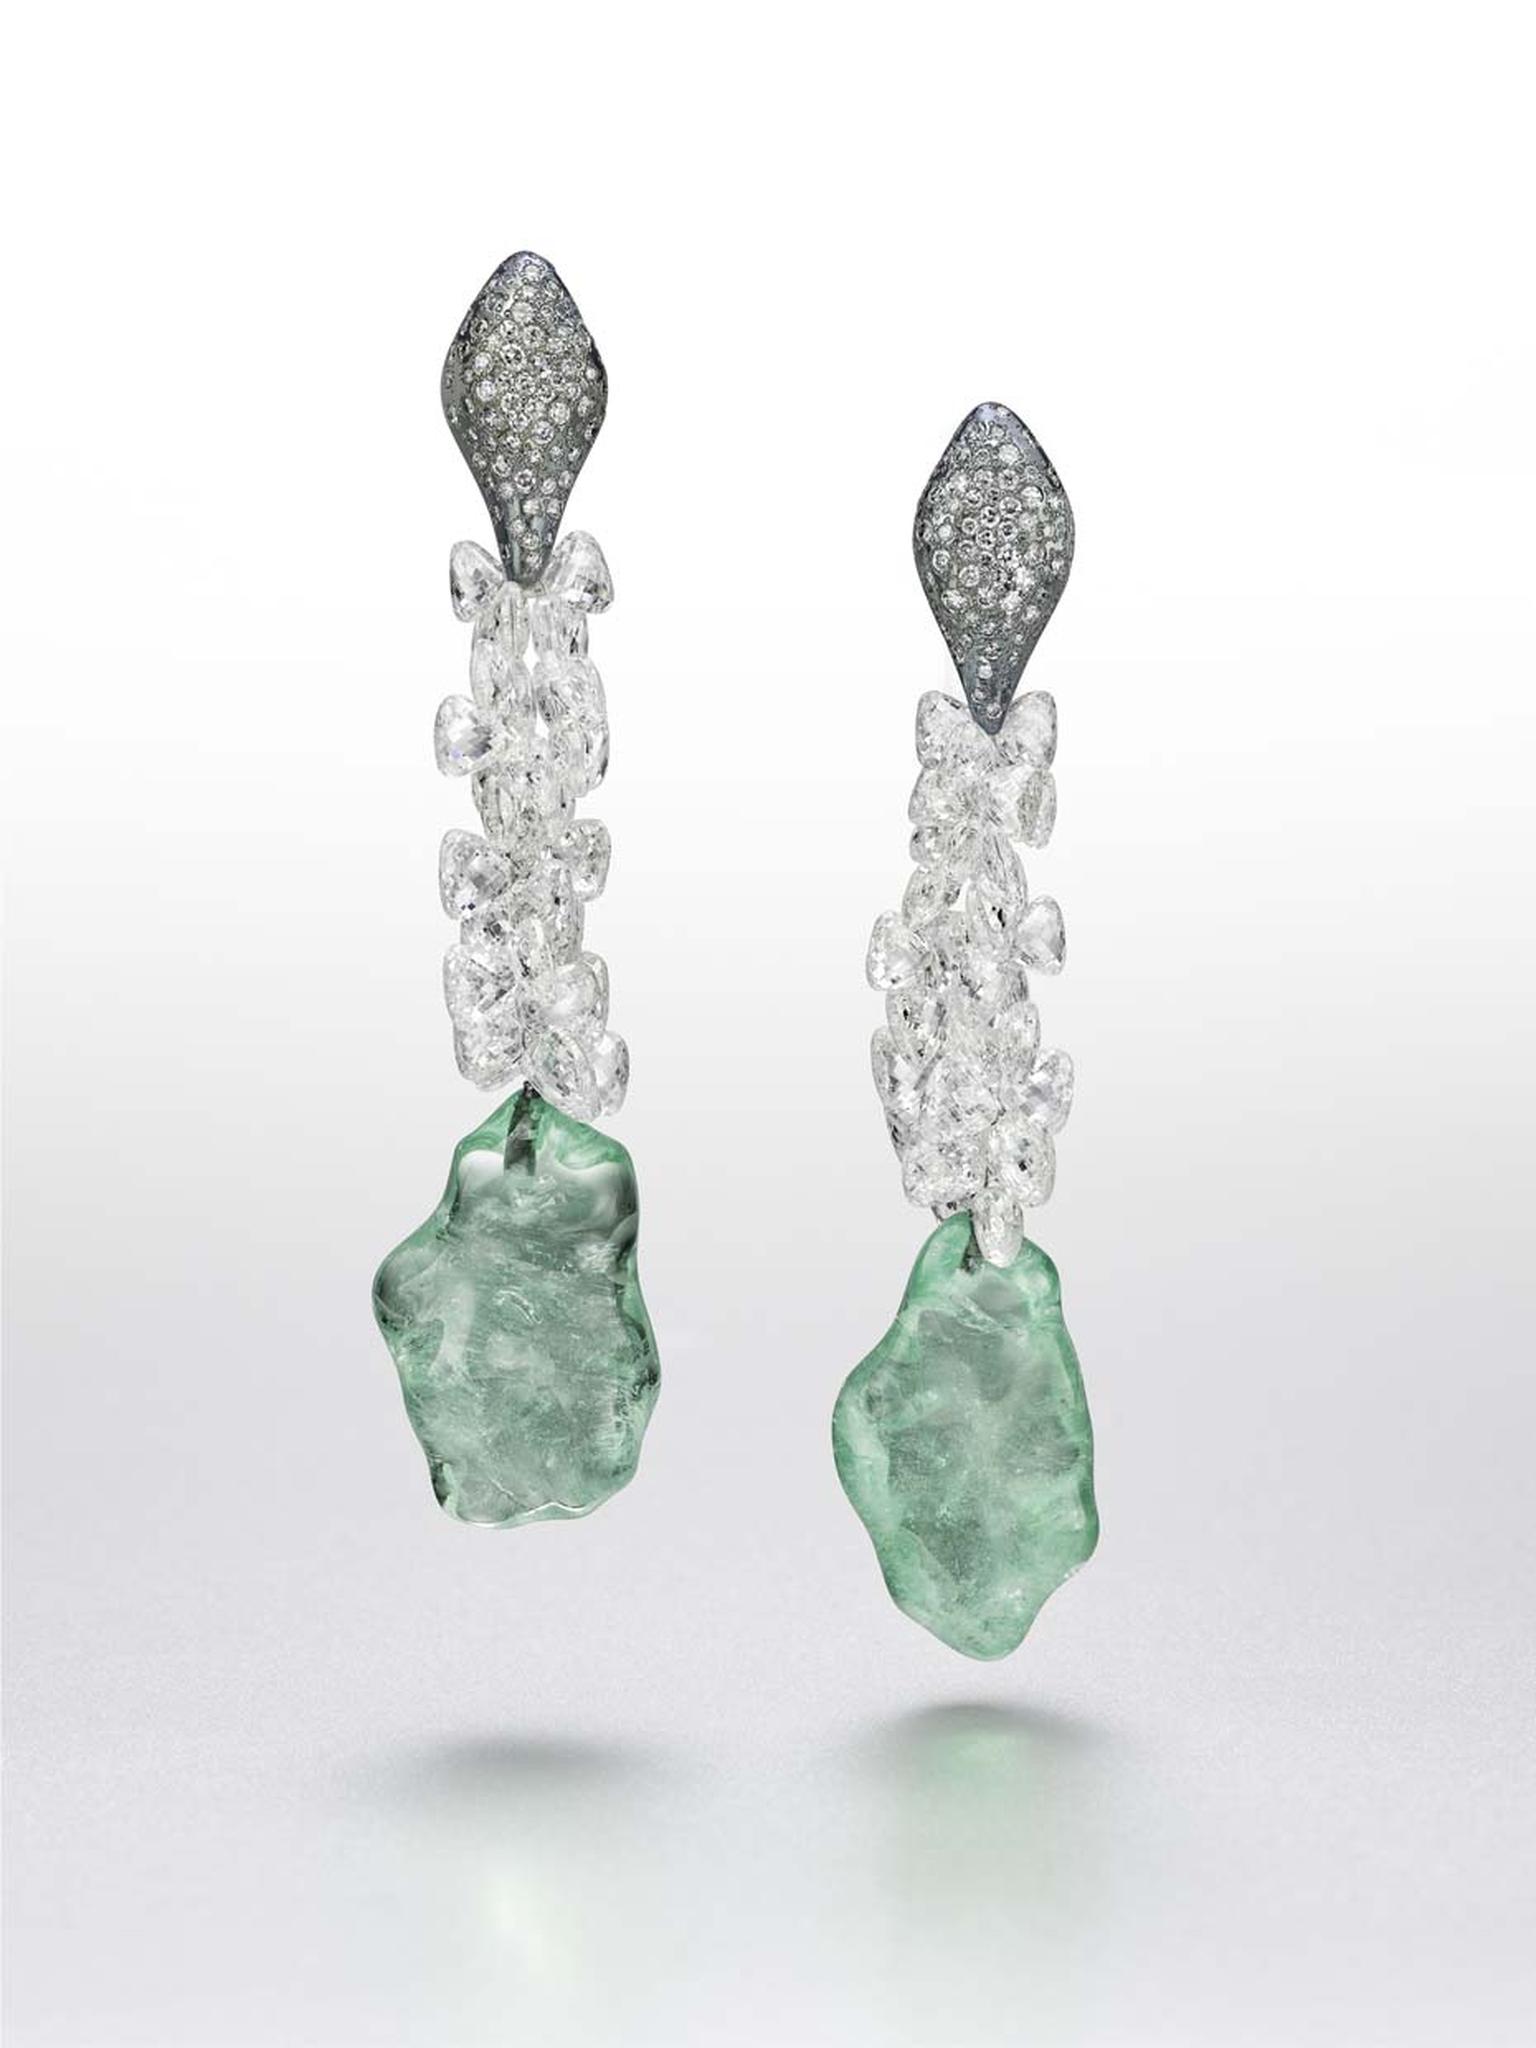 Suzanne Syz It's Raining Dreams white gold and titanium earrings with Paraiba tourmalines and briolette and brilliant-cut diamonds.